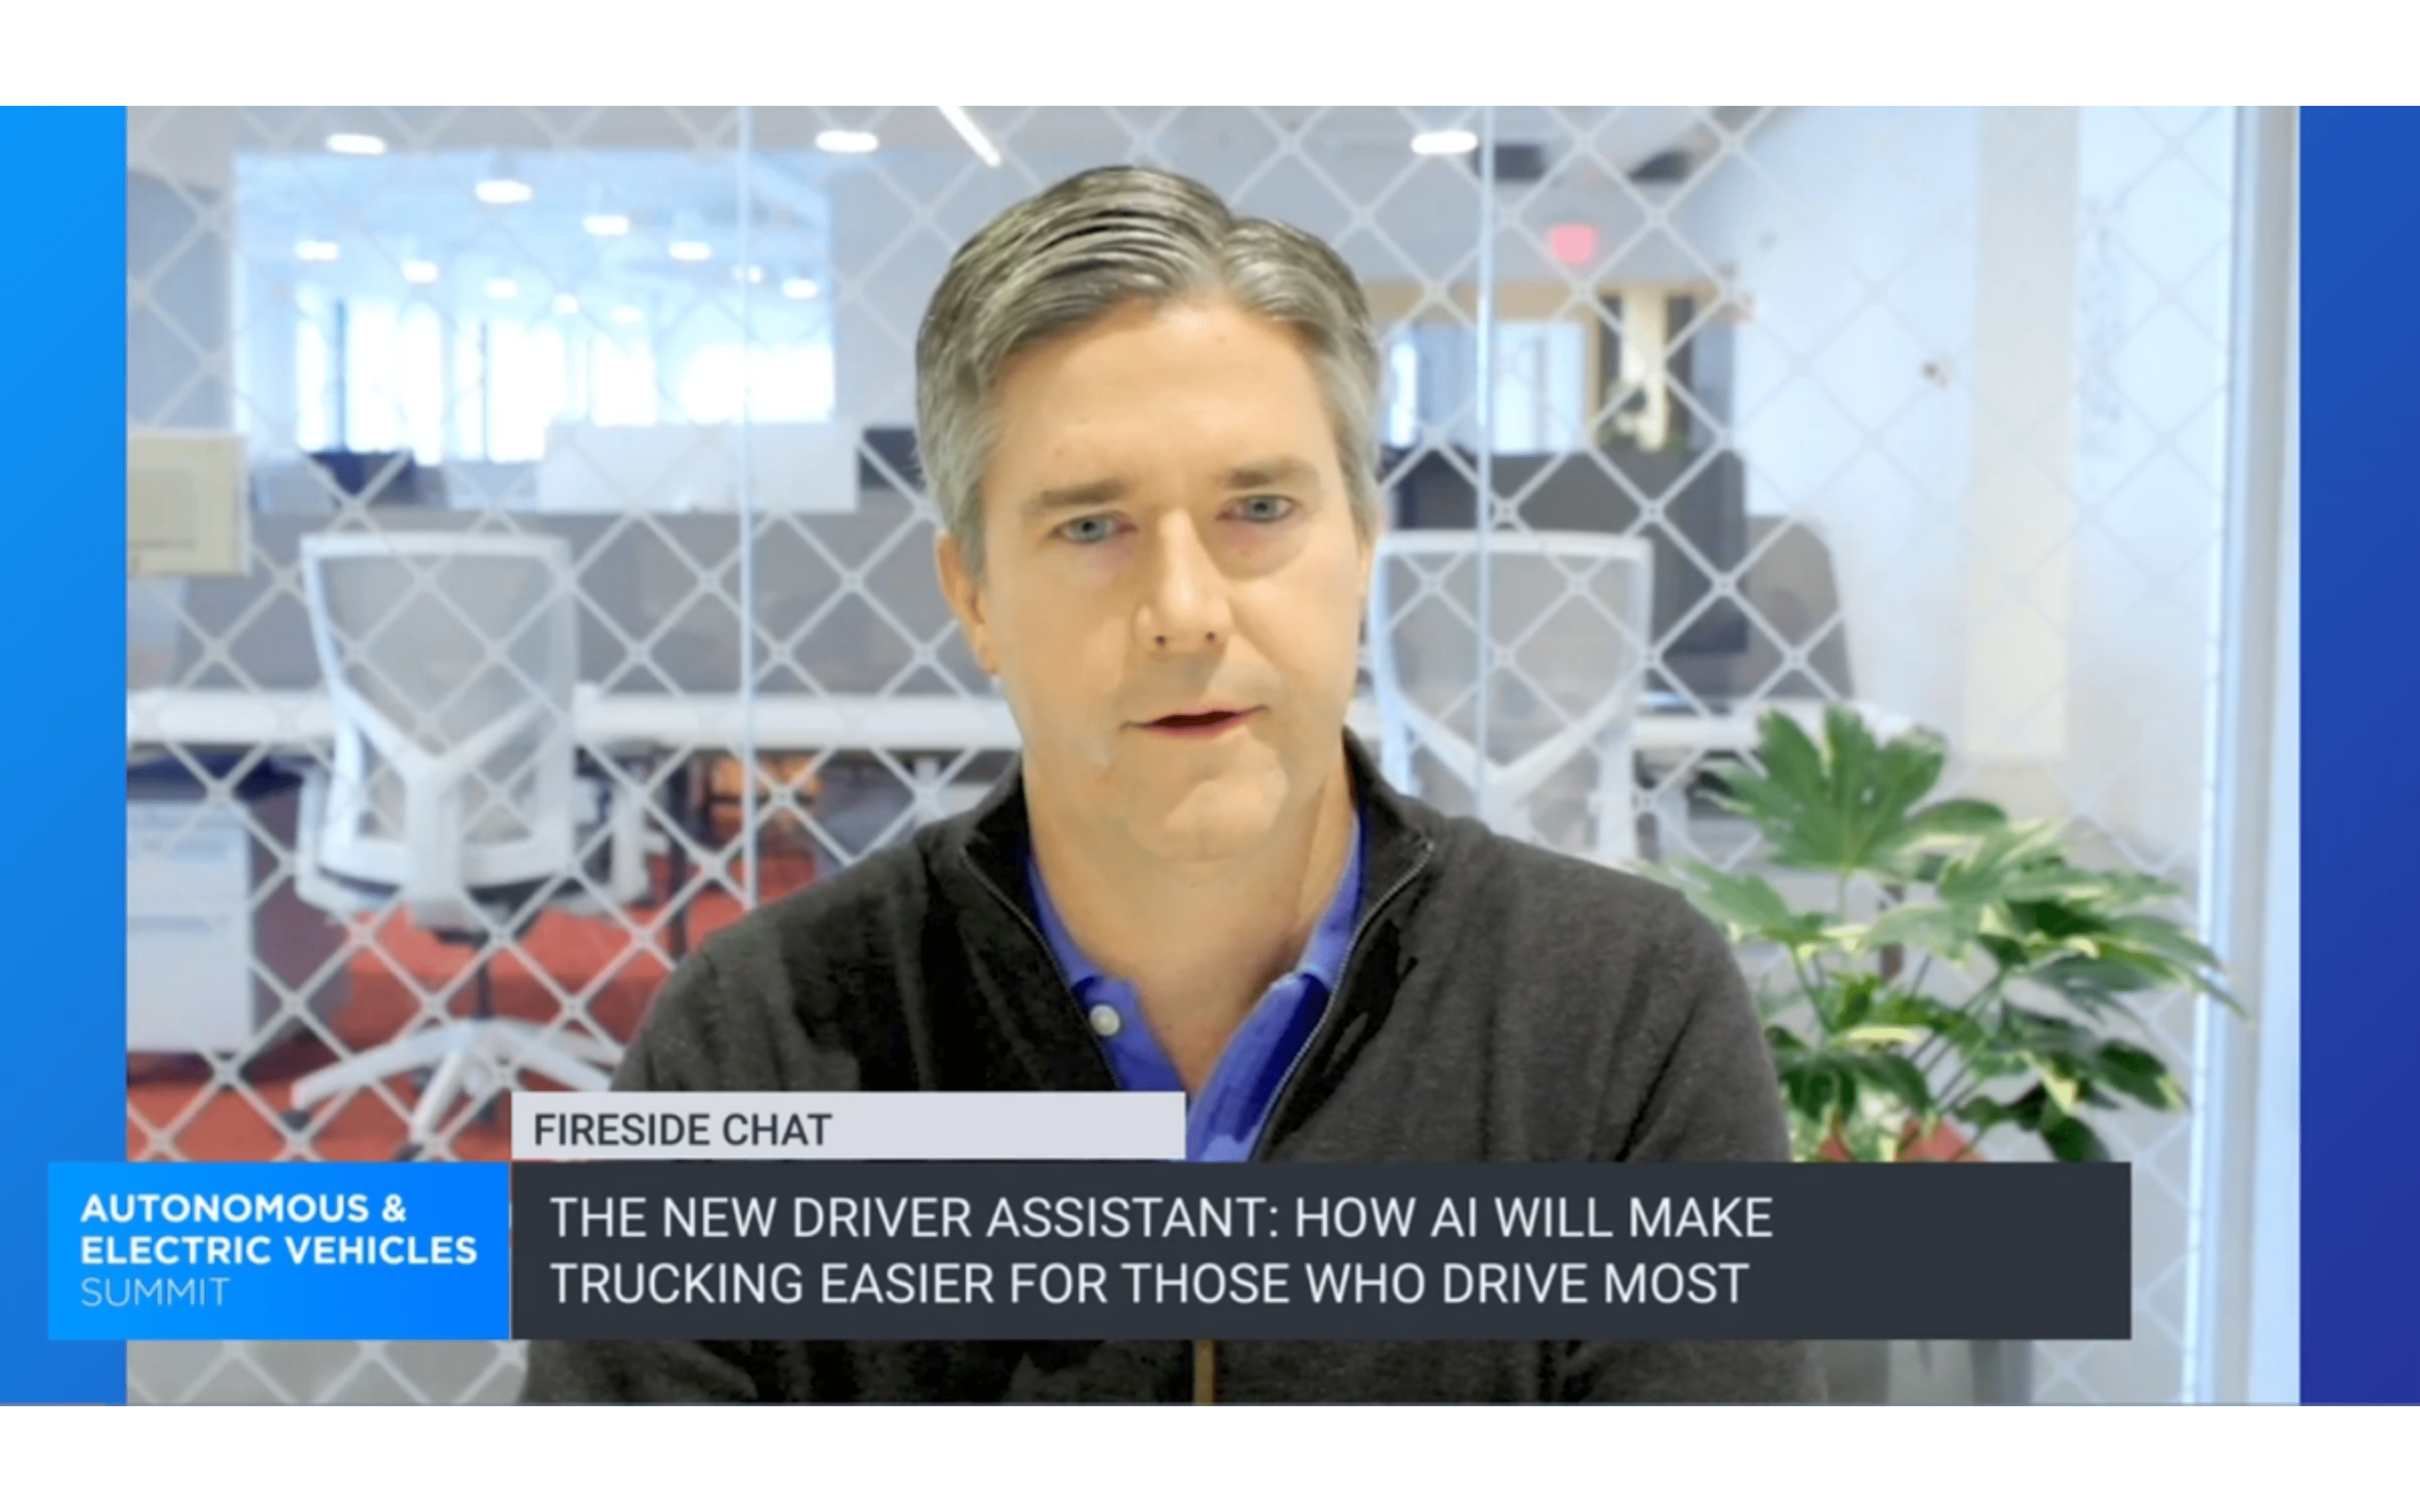 Poster from video from Autonomous & Electric vehicles summit topic: The new driver assistant; How AI will make trucking easier for those who drive most